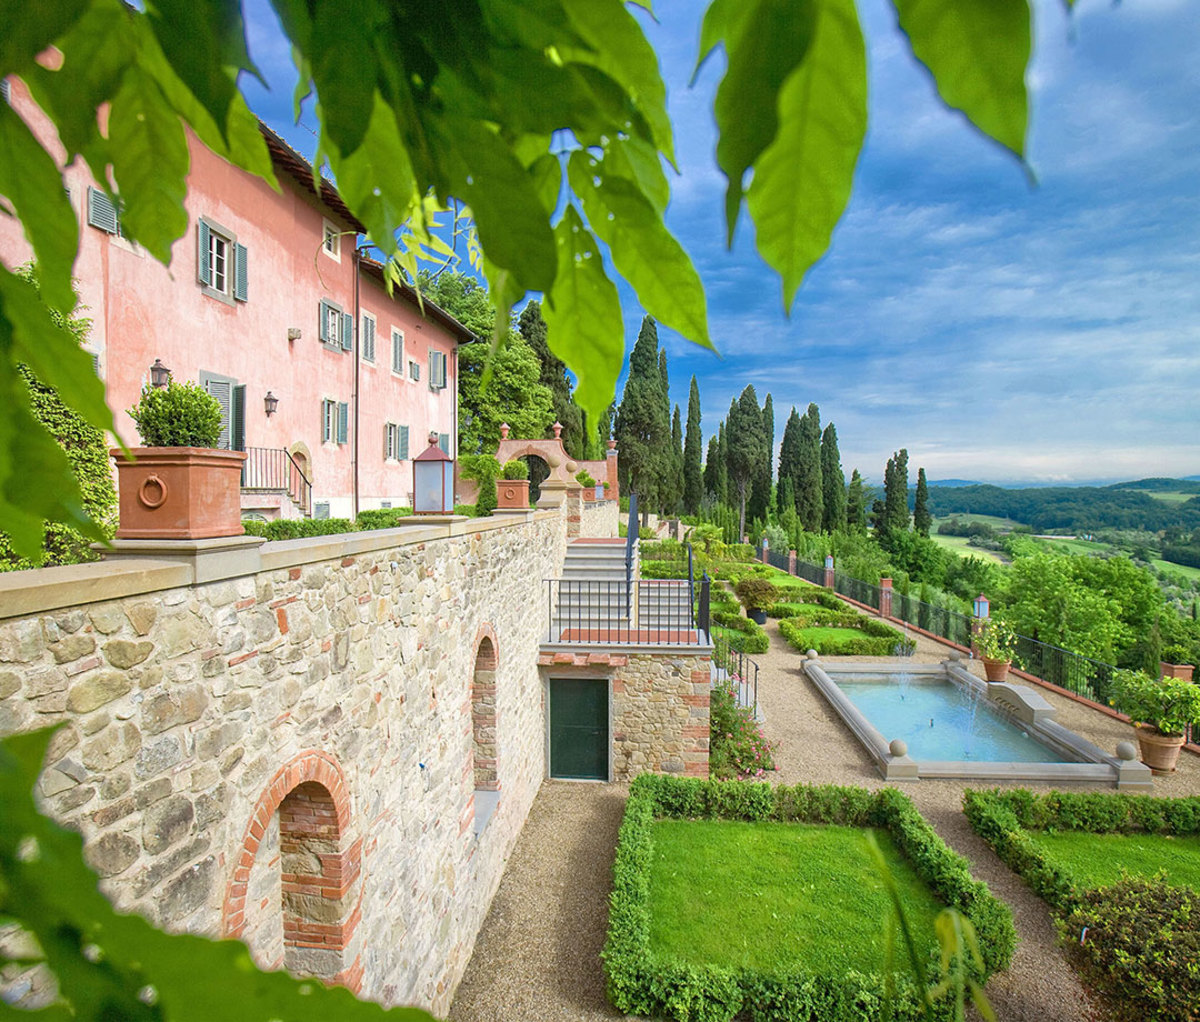 The grounds at 14th-century Villa Barberino in Tuscany